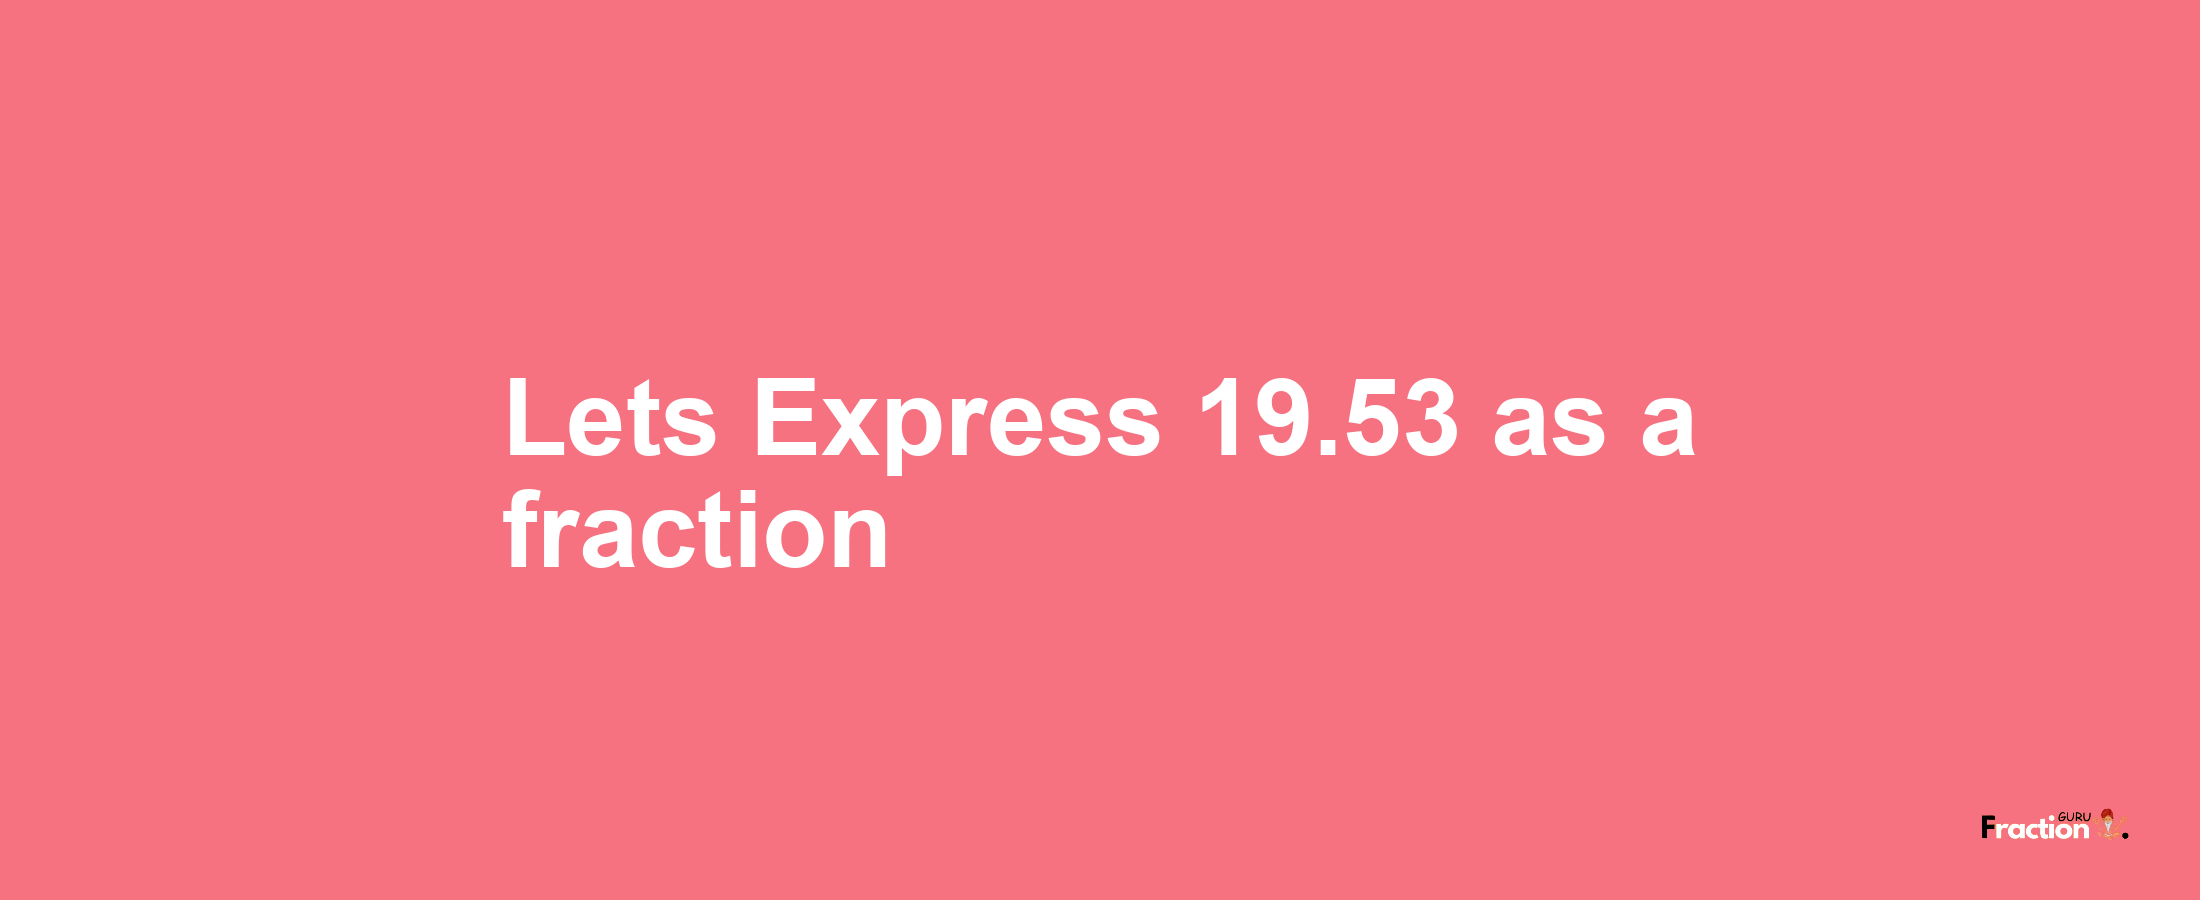 Lets Express 19.53 as afraction